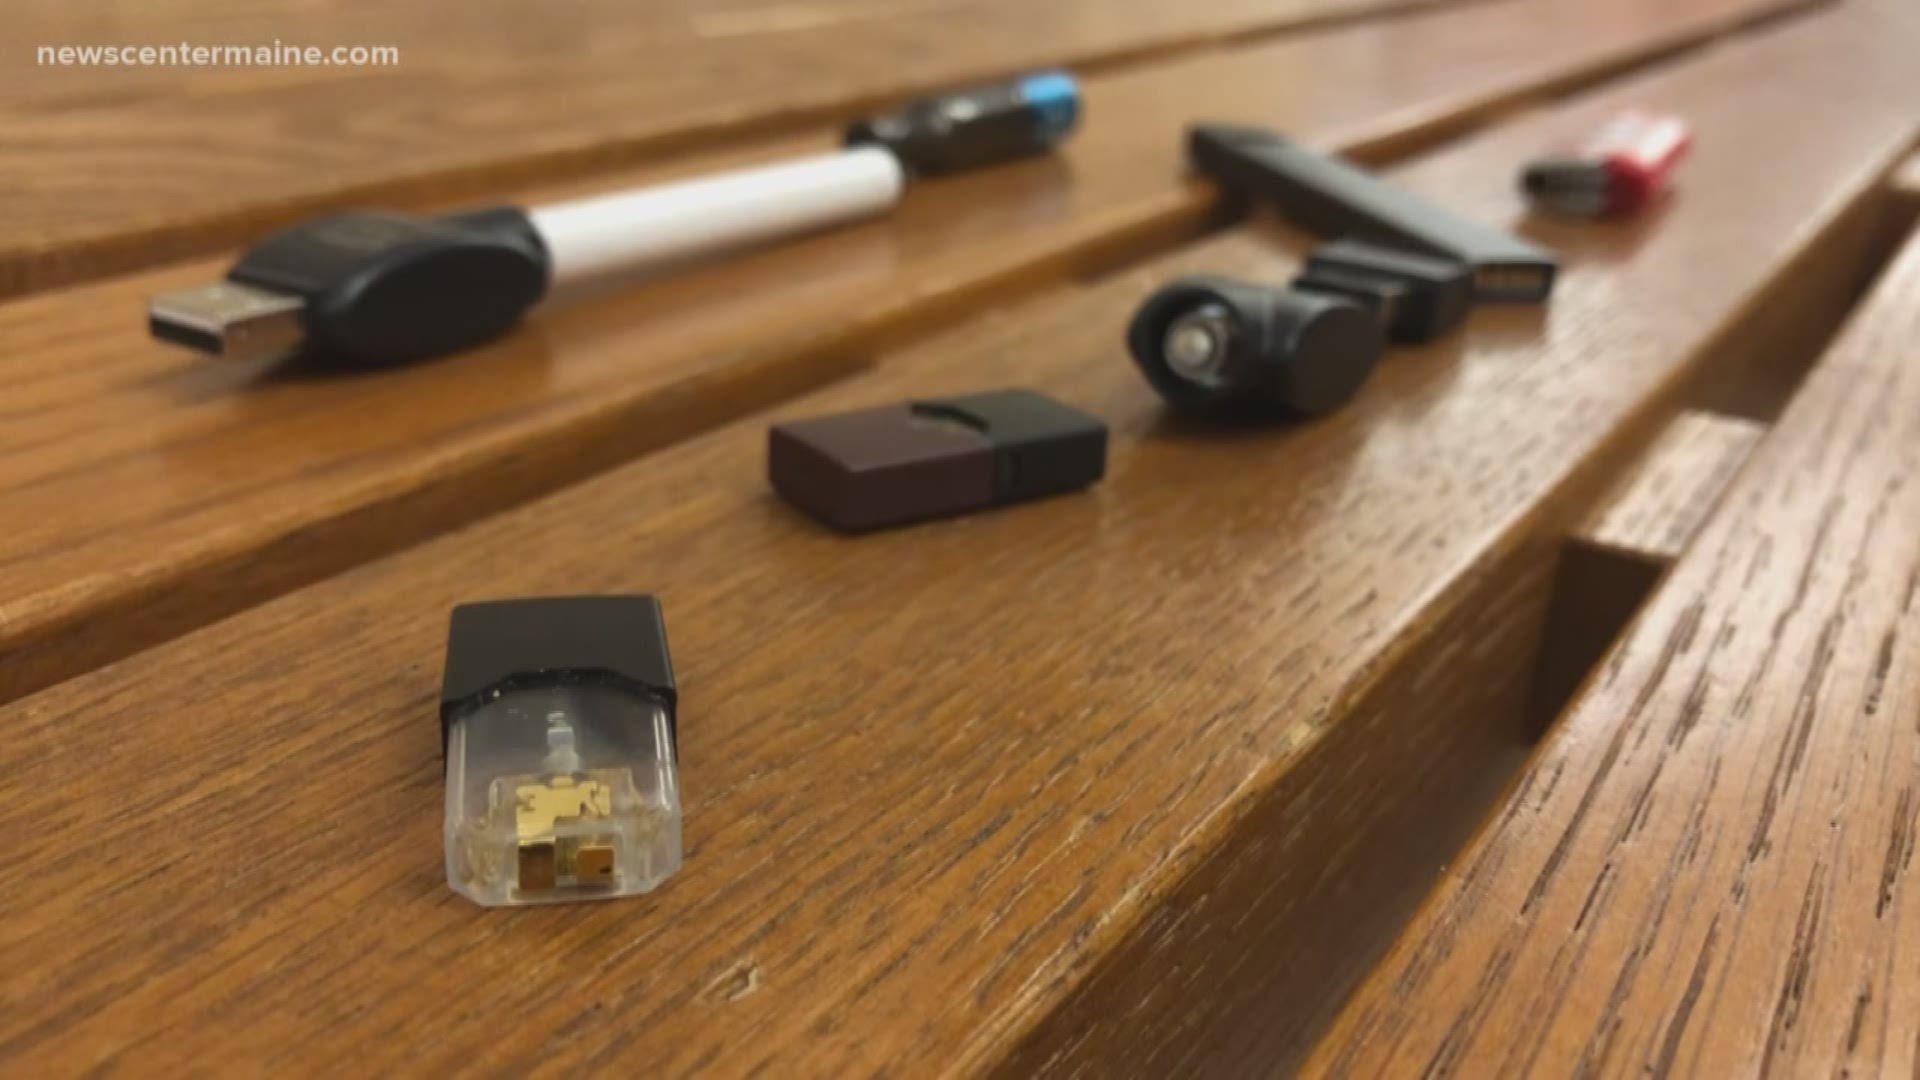 Now school staff say it's harder to catch kids using them. Chris Costa spoke with students, a school resource officer and prevention specialist about *why* vaping and e-cigarette use is increasing.